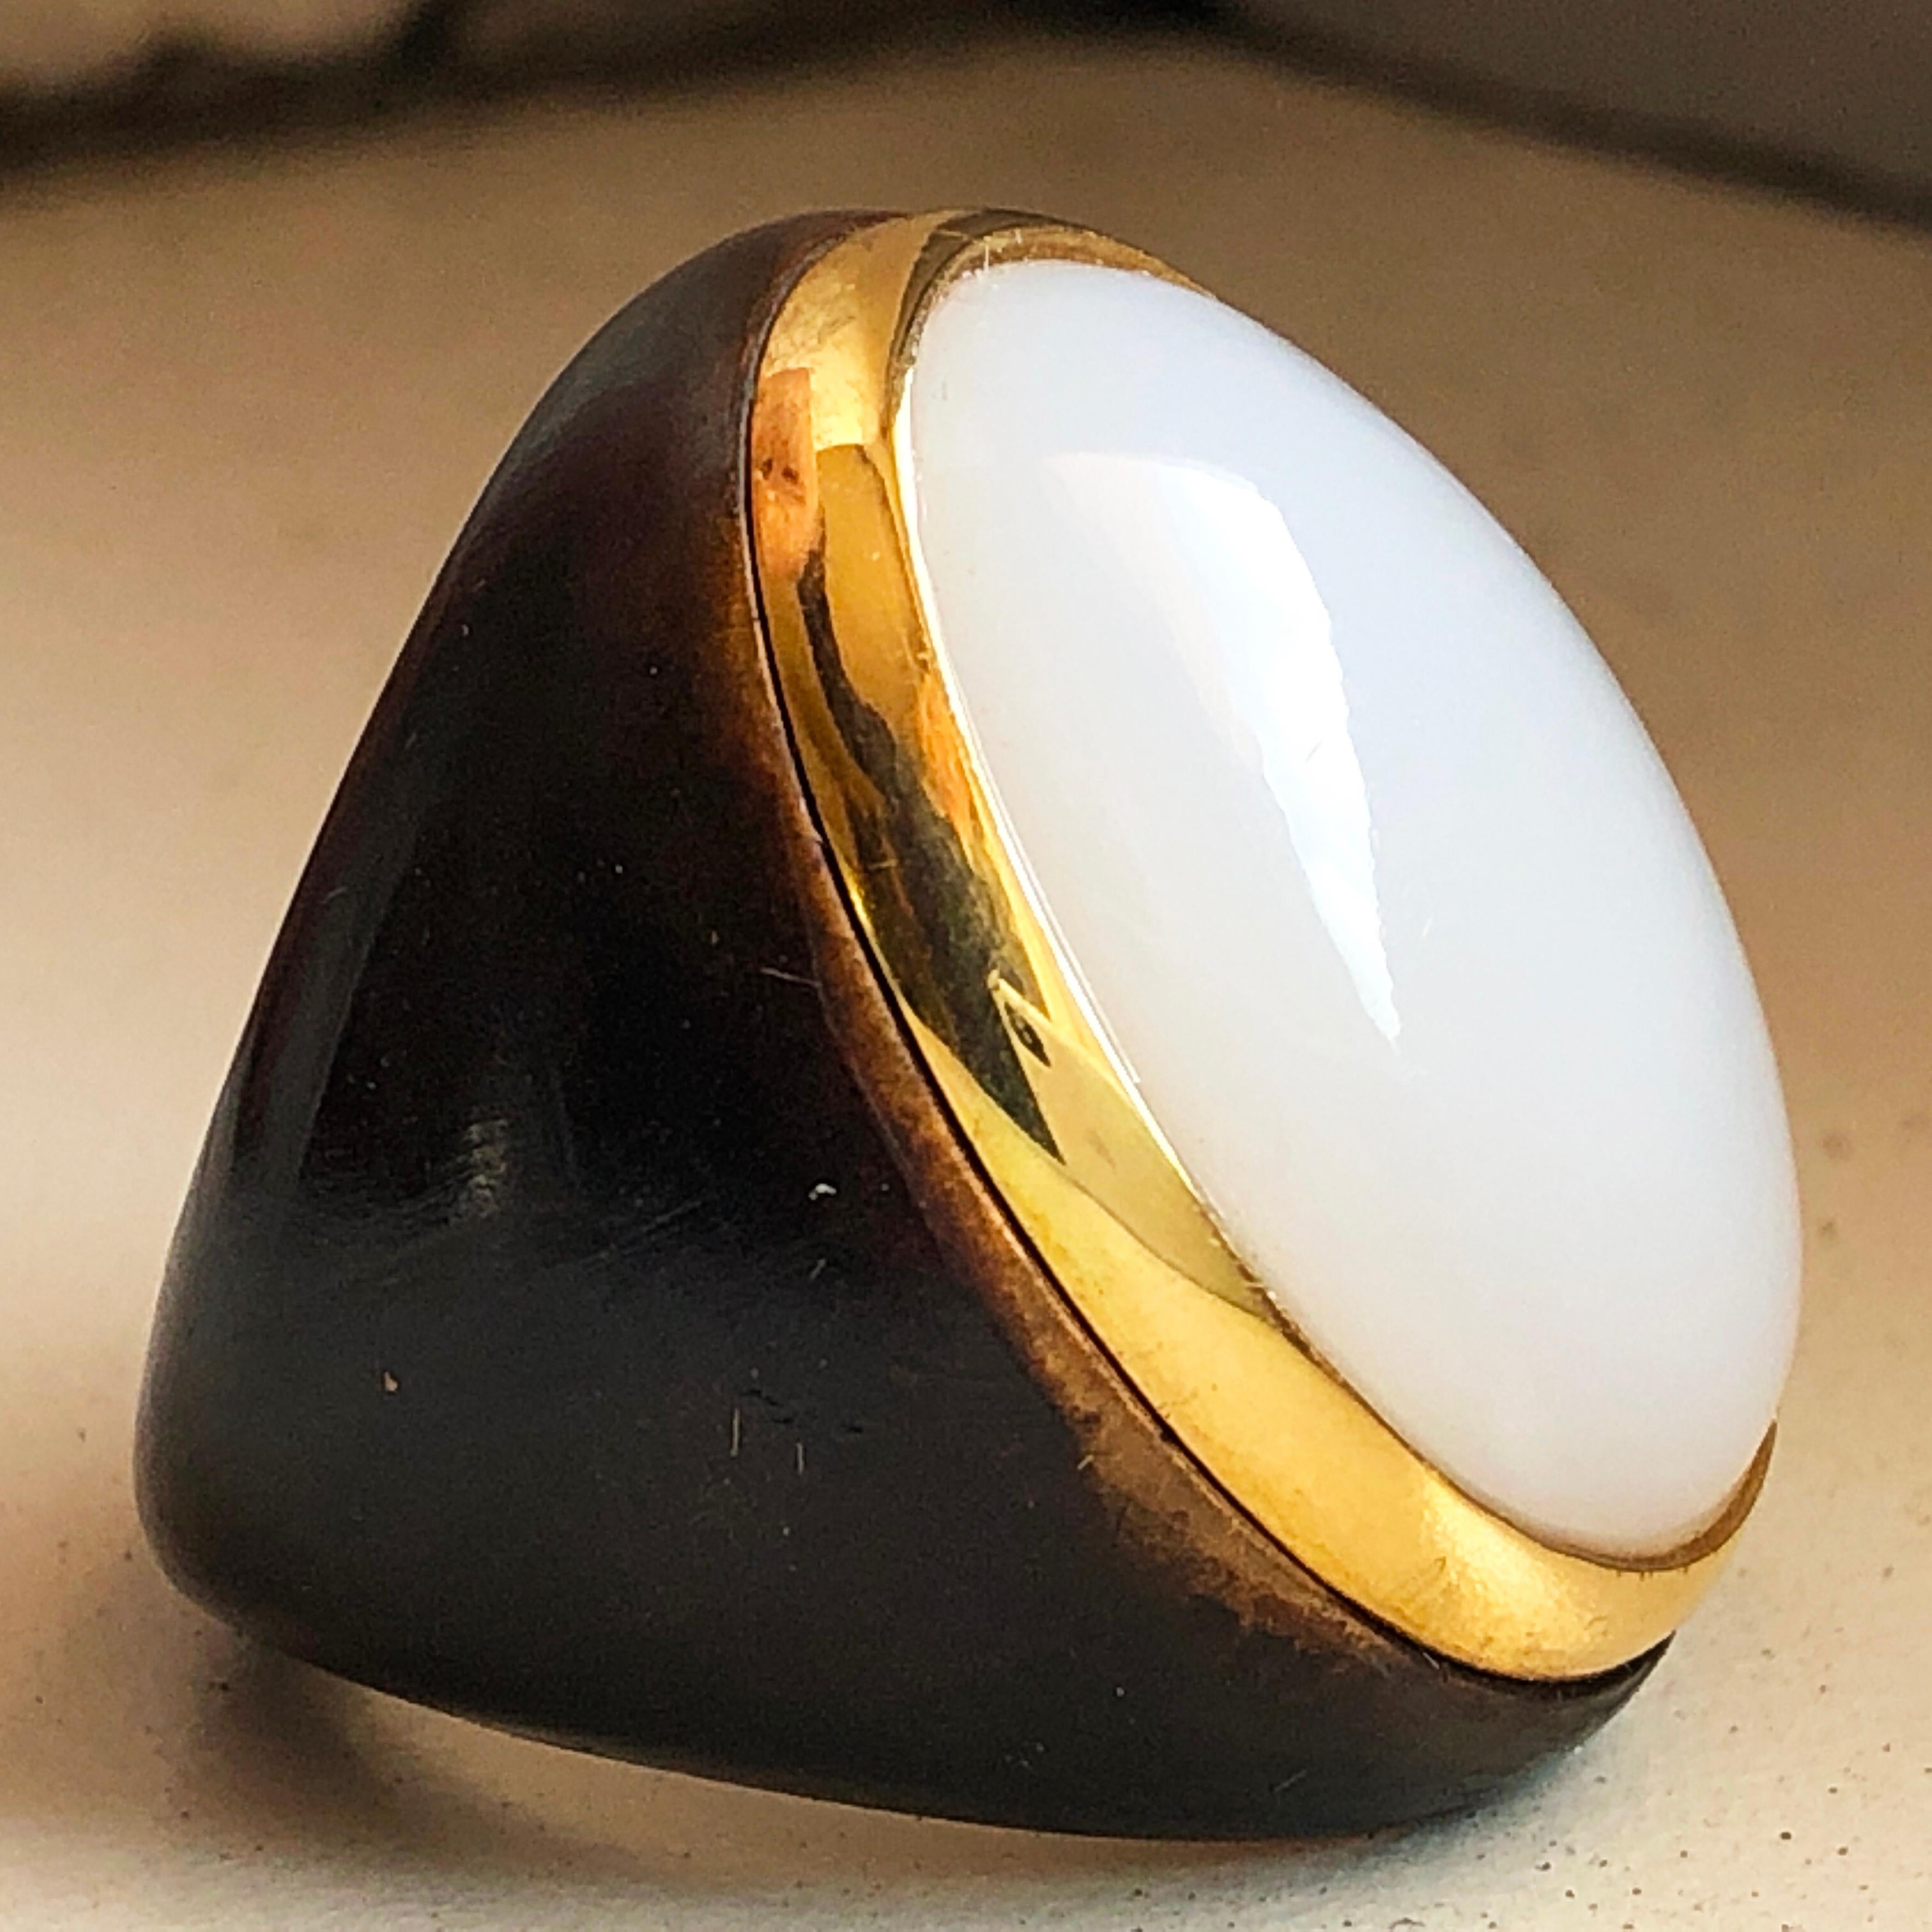 One-of-a-kind Contemporary Cocktail Ring Featuring a 20 Carat Natural White Opal Cabochon (0.911x0.666in) in an 18K Yellow Gold Brown Oxidized Brass Setting.
The color-changing of the White Opal's cabochon combined with the gold and brown brass